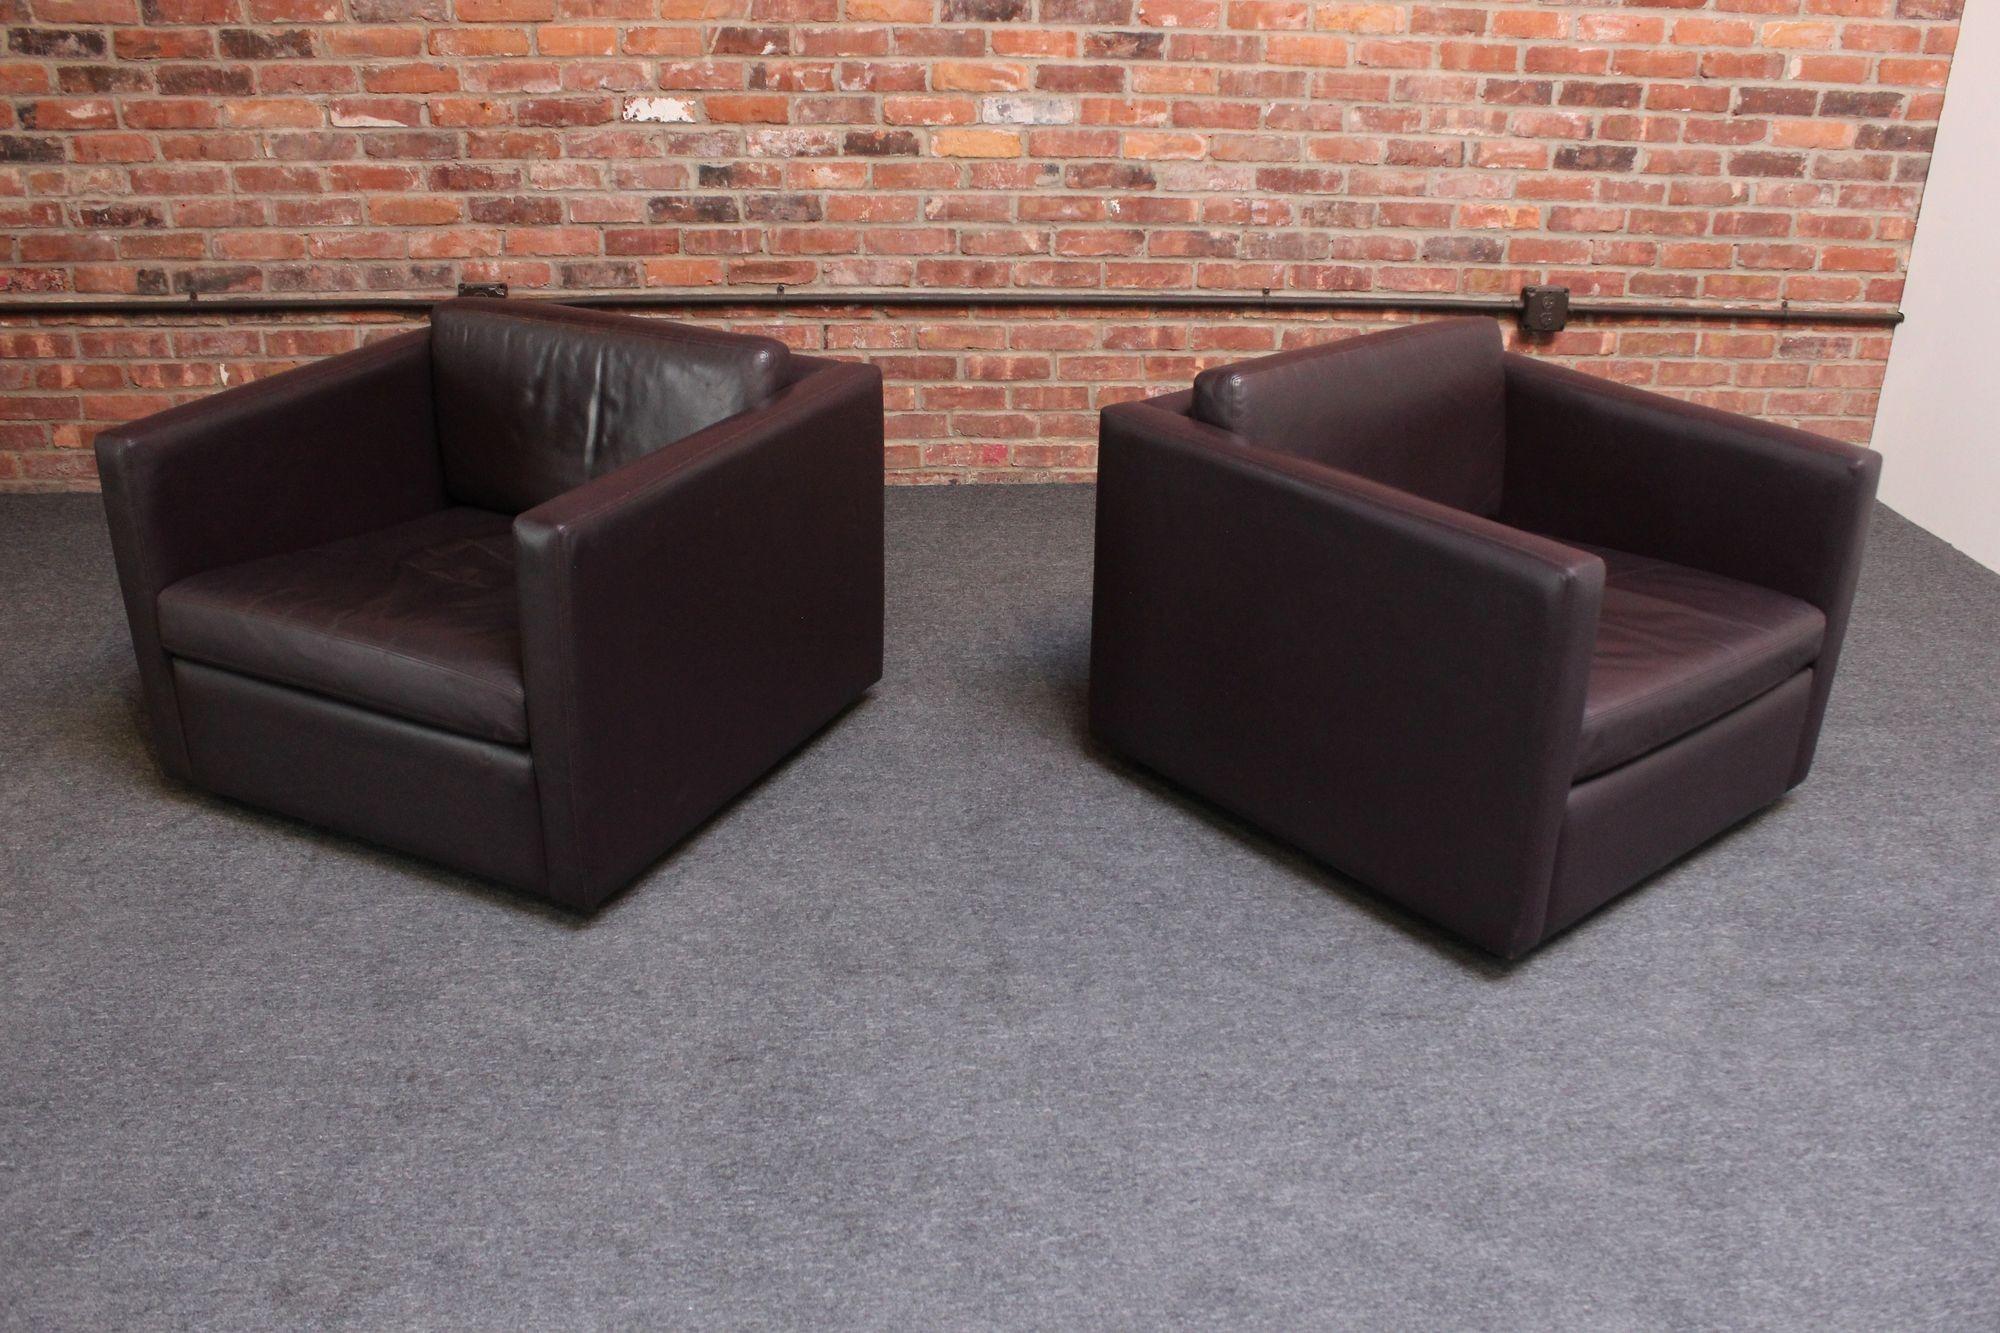 Pair of cube lounge / club chairs designed in 1971 by Charles Pfister for Knoll retaining their original 'eggplant' leather and ebonized steel block feet. Nicely proportioned design offering a sleek, modernist form and comfortable, luxe, beautifully